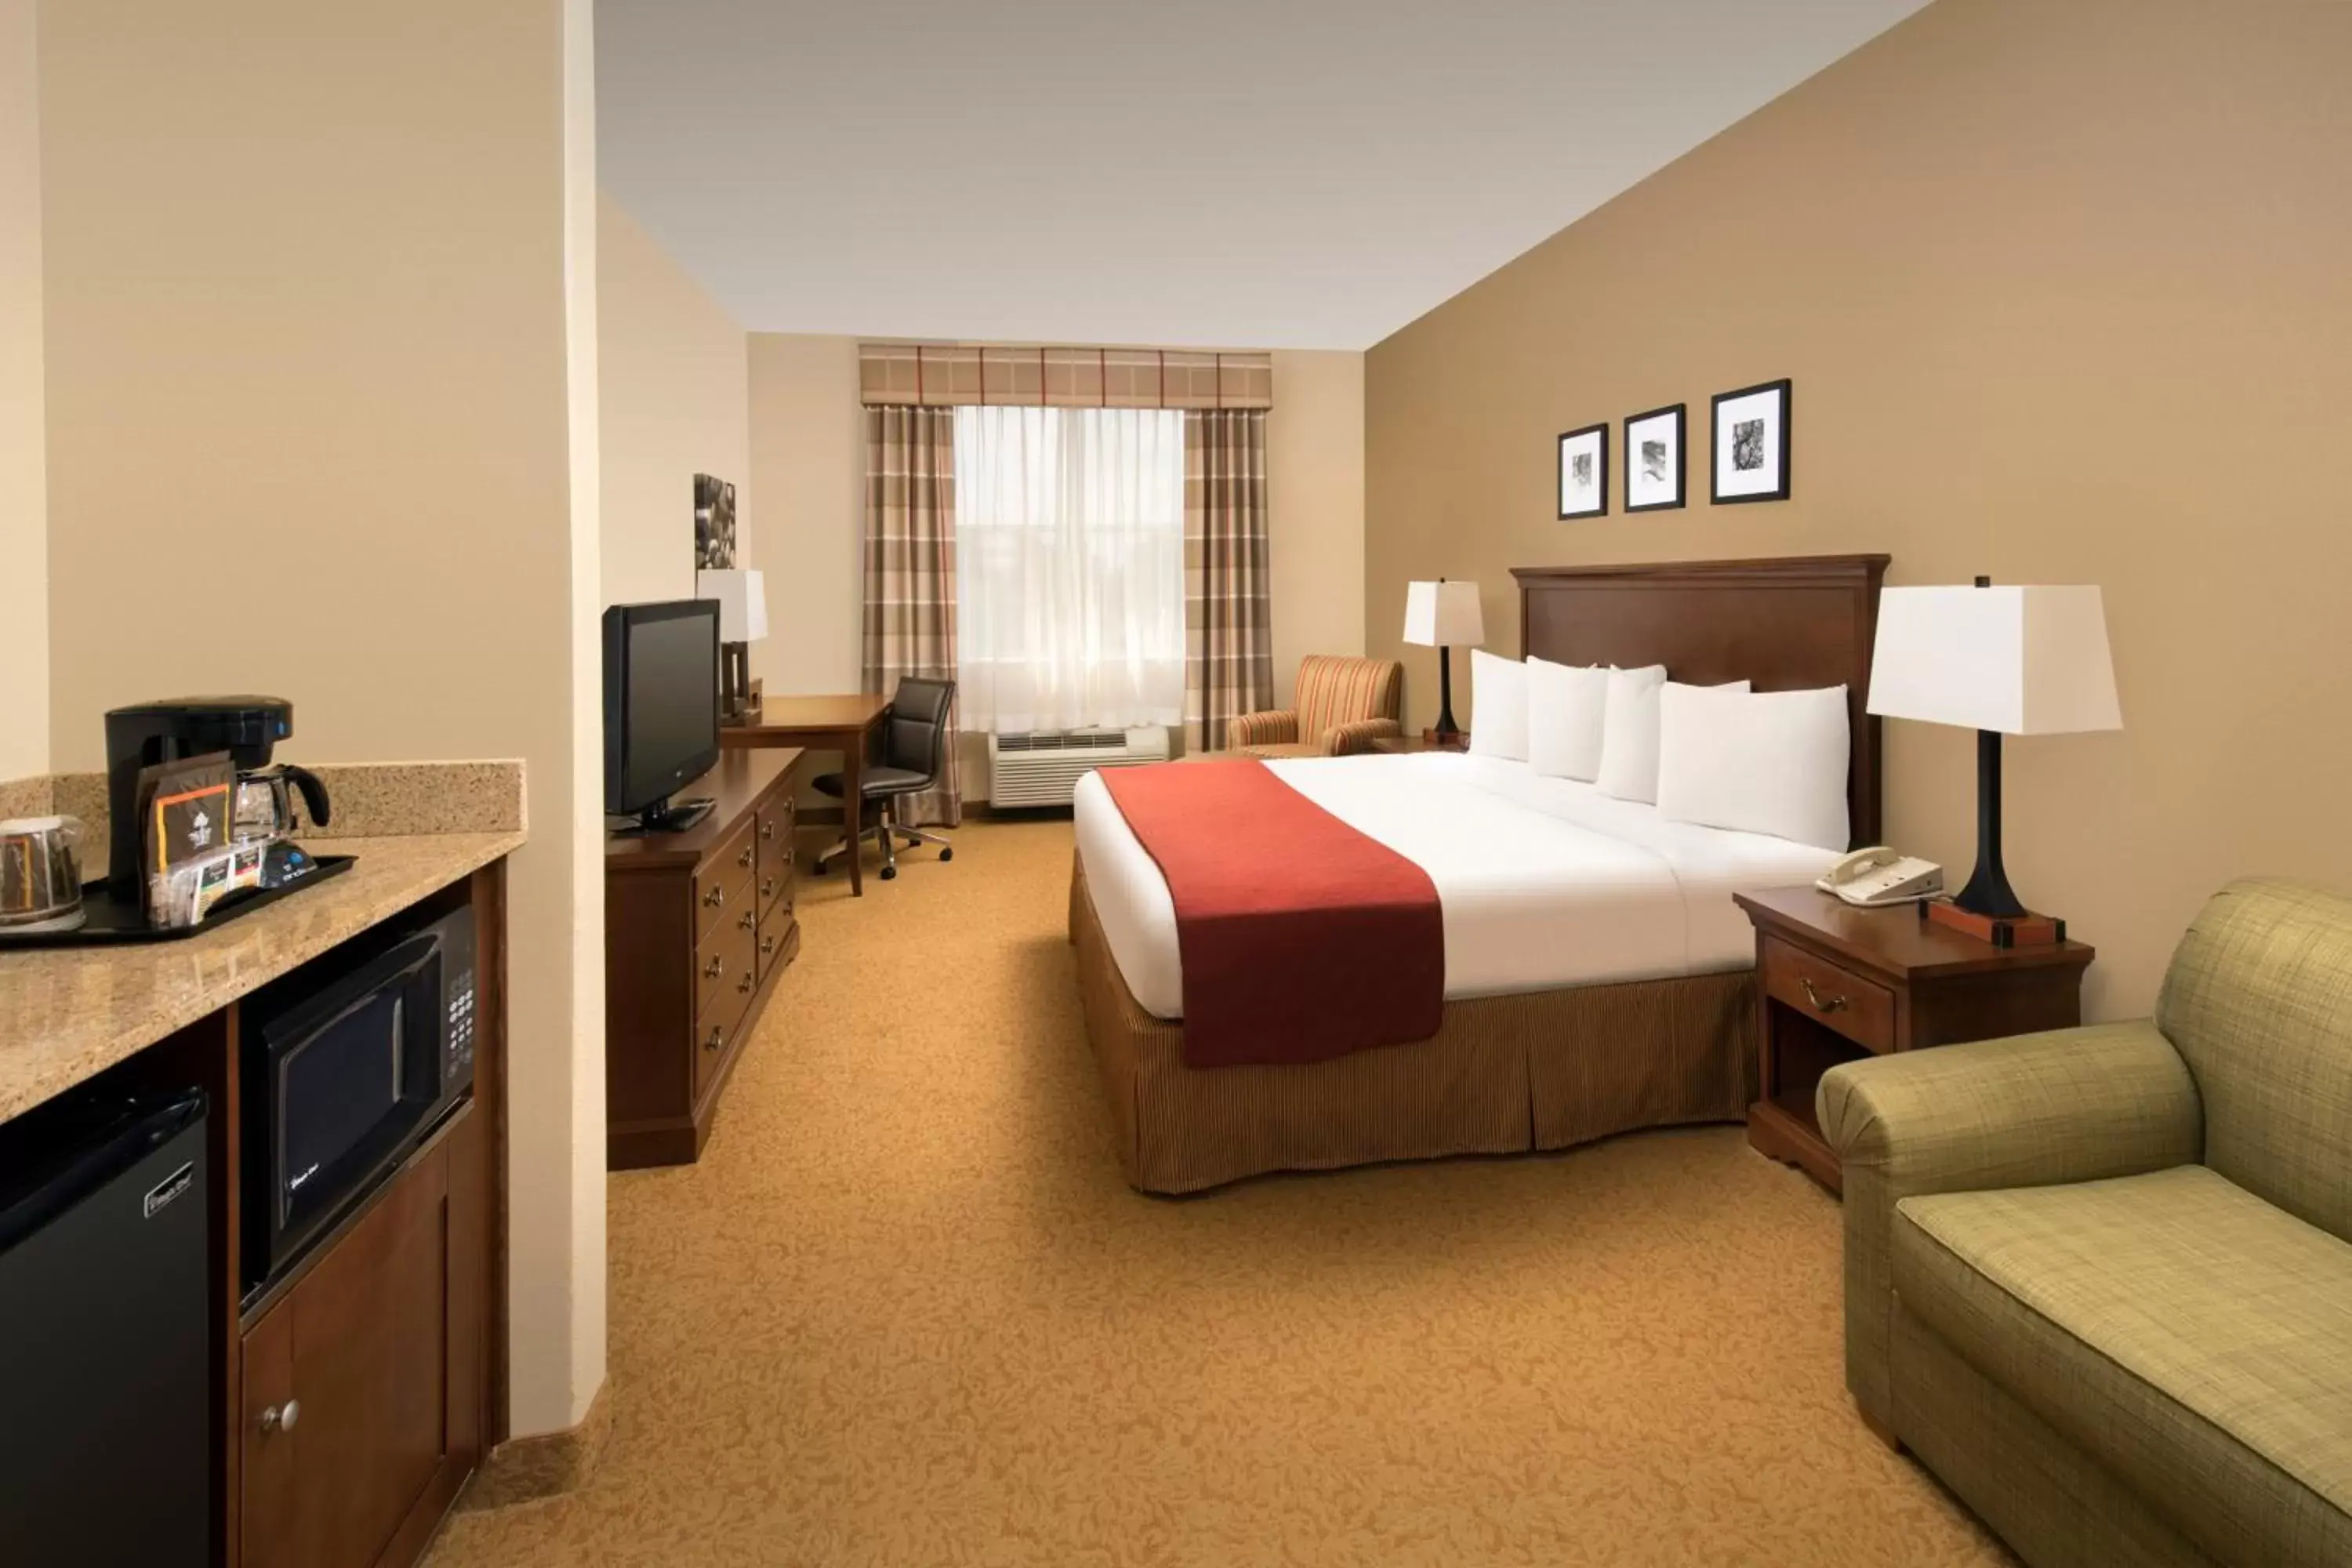 Bedroom in Country Inn & Suites by Radisson, Houston Intercontinental Airport East, TX